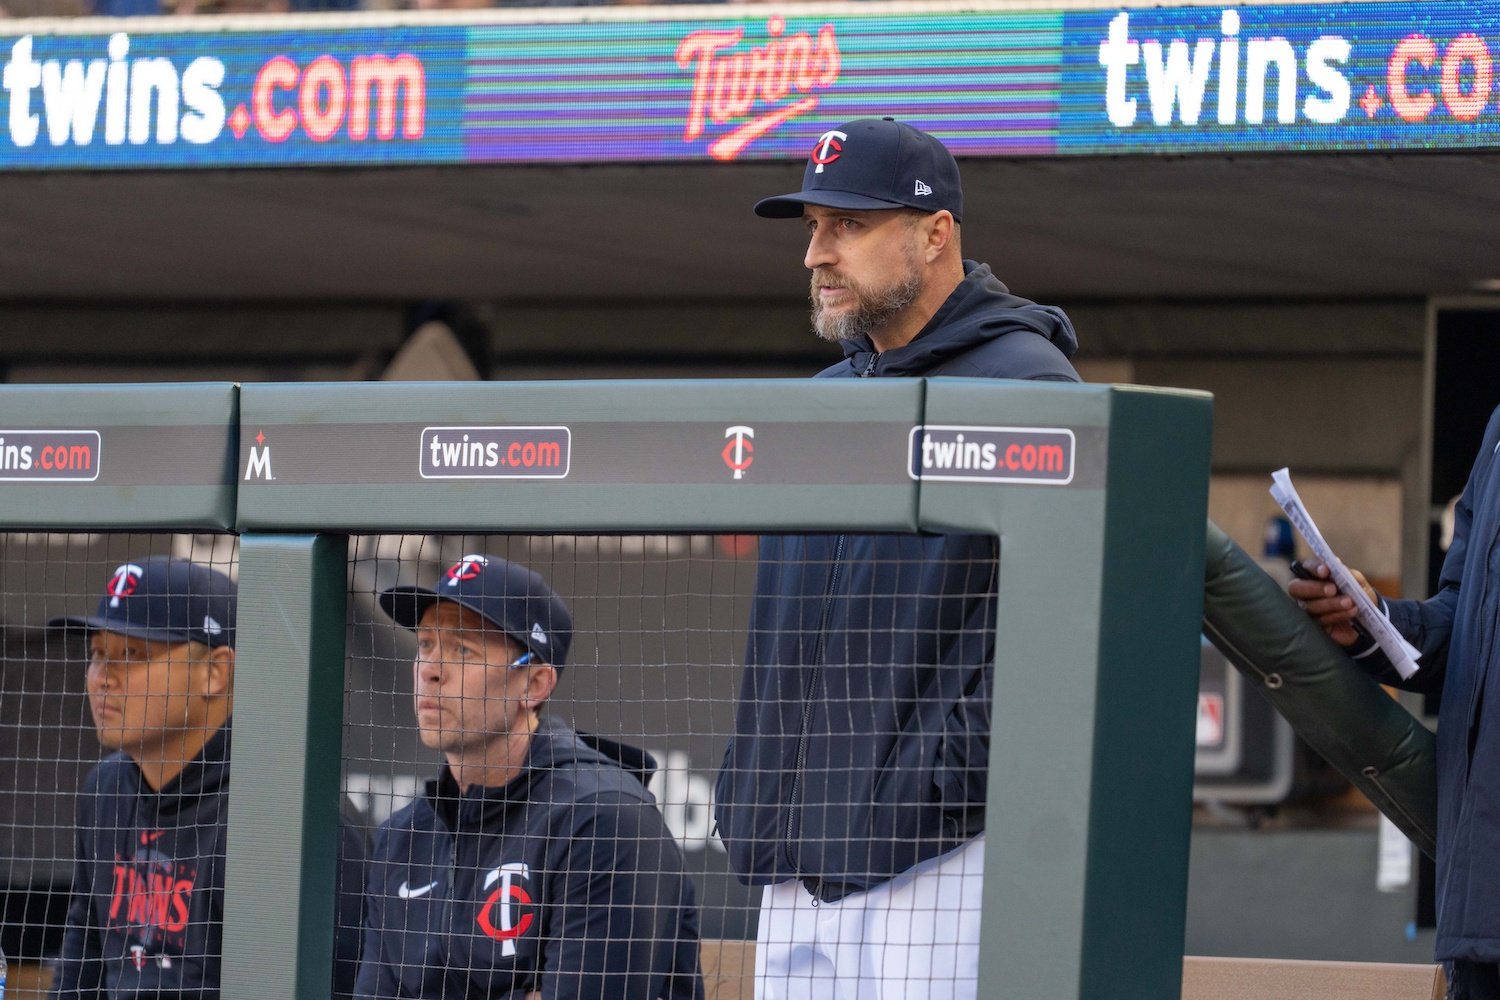 Injuries have complicated things in Twins outfield - InForum